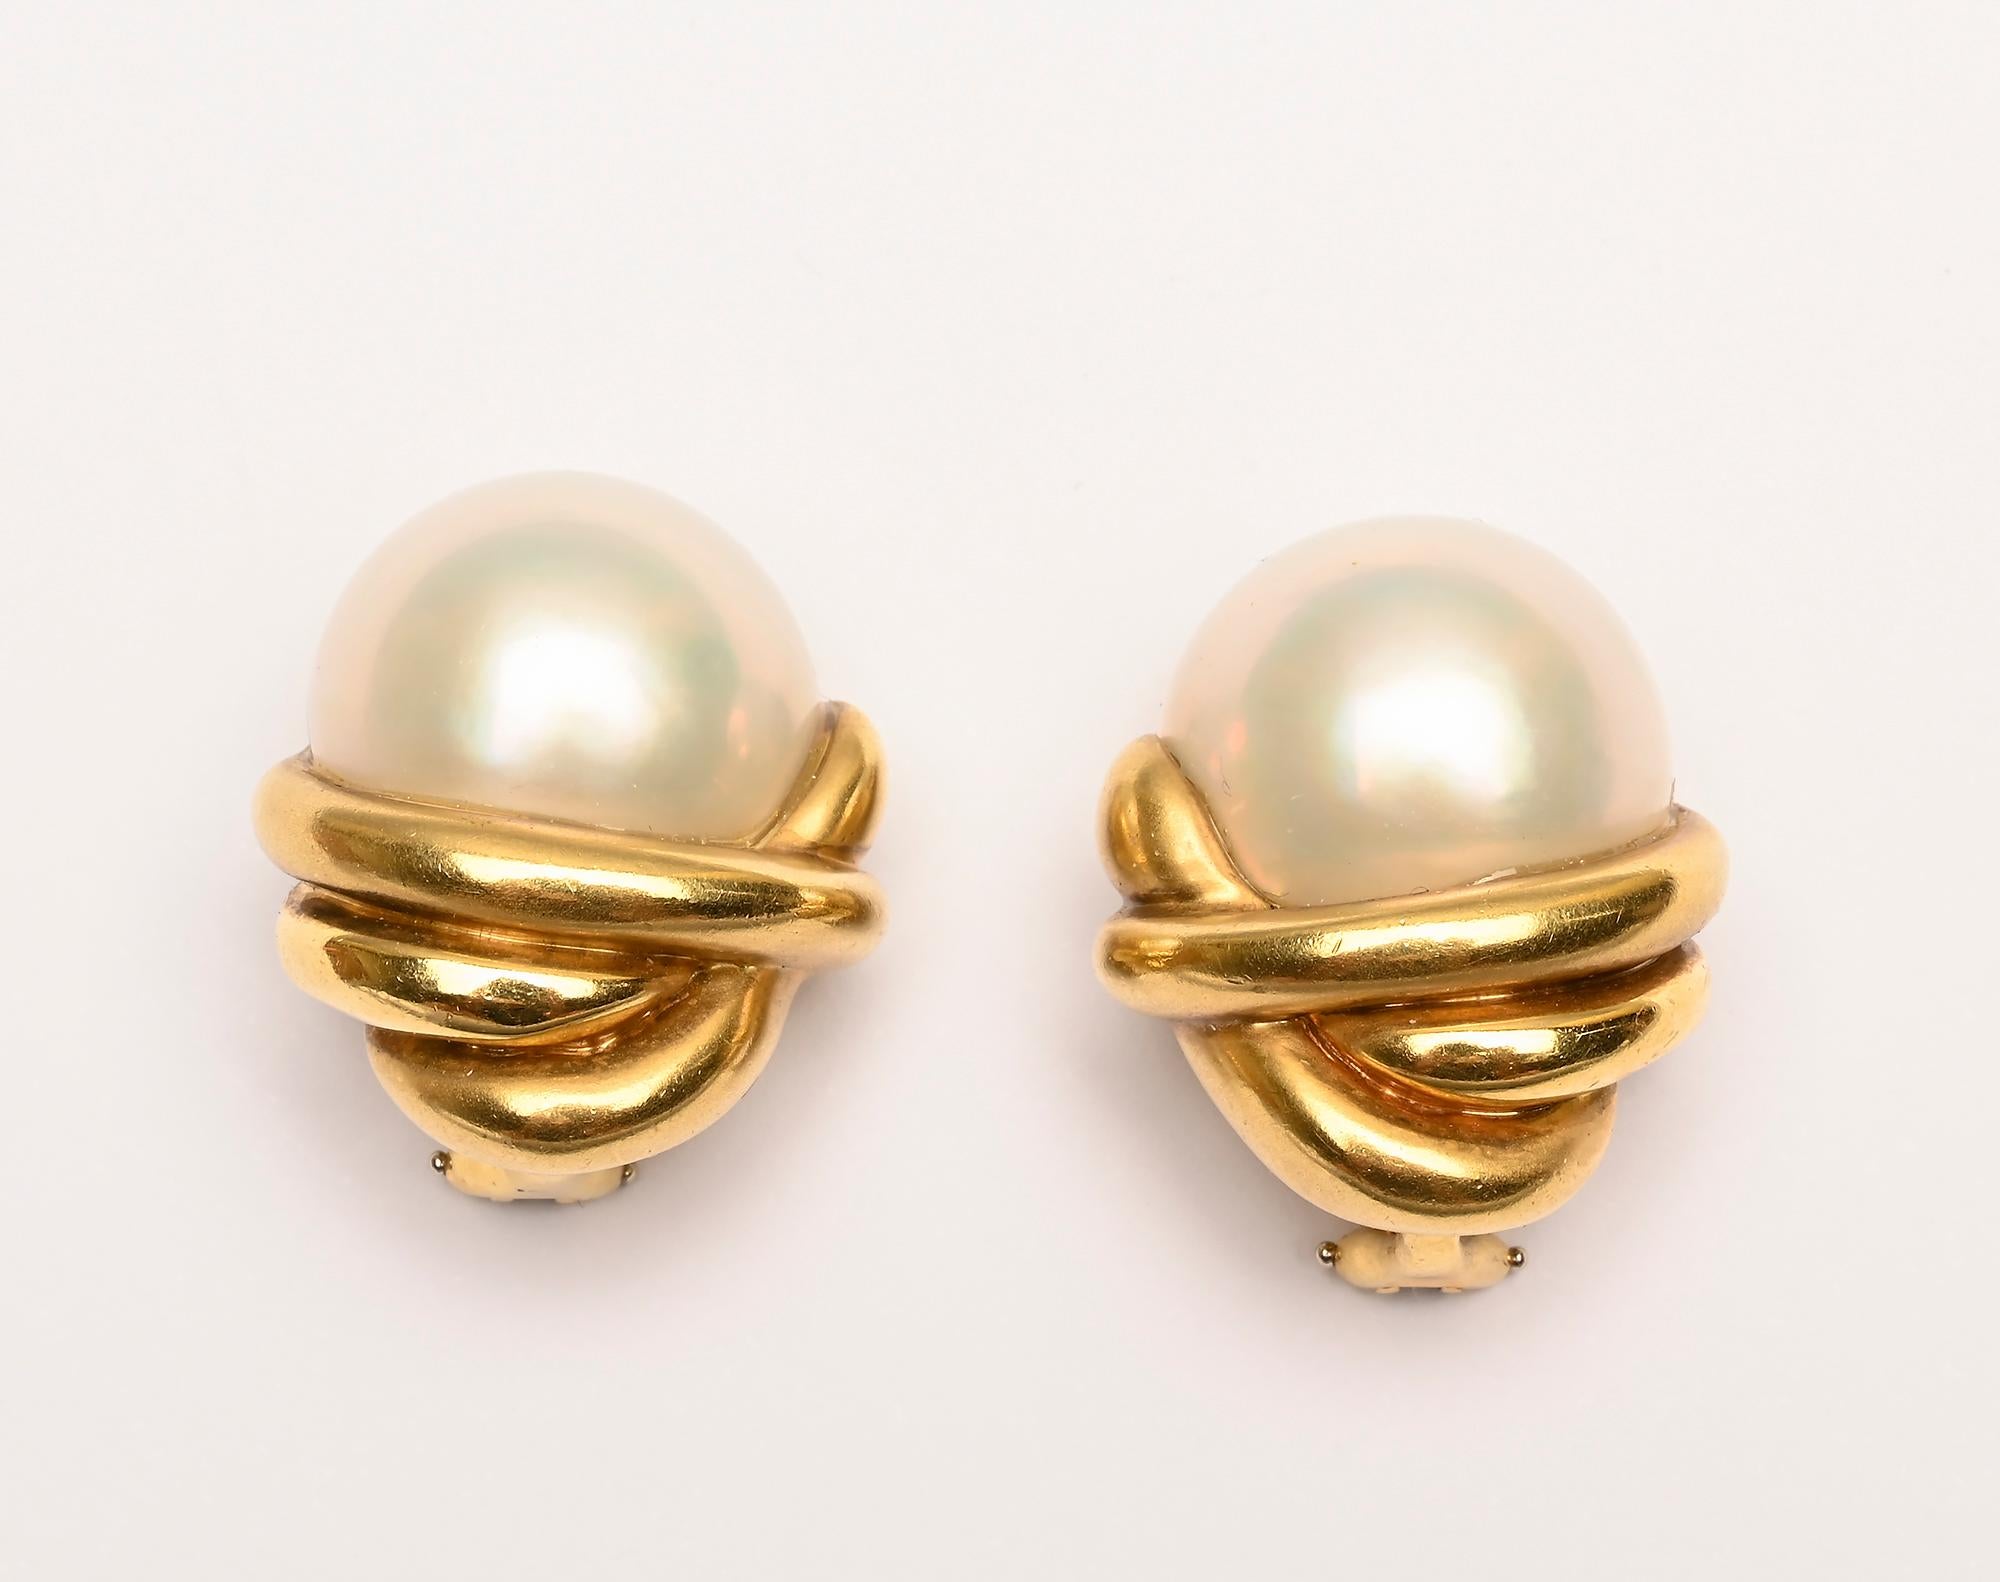 Contemporary Marlene Stowe Pearl and Gold Earrings For Sale